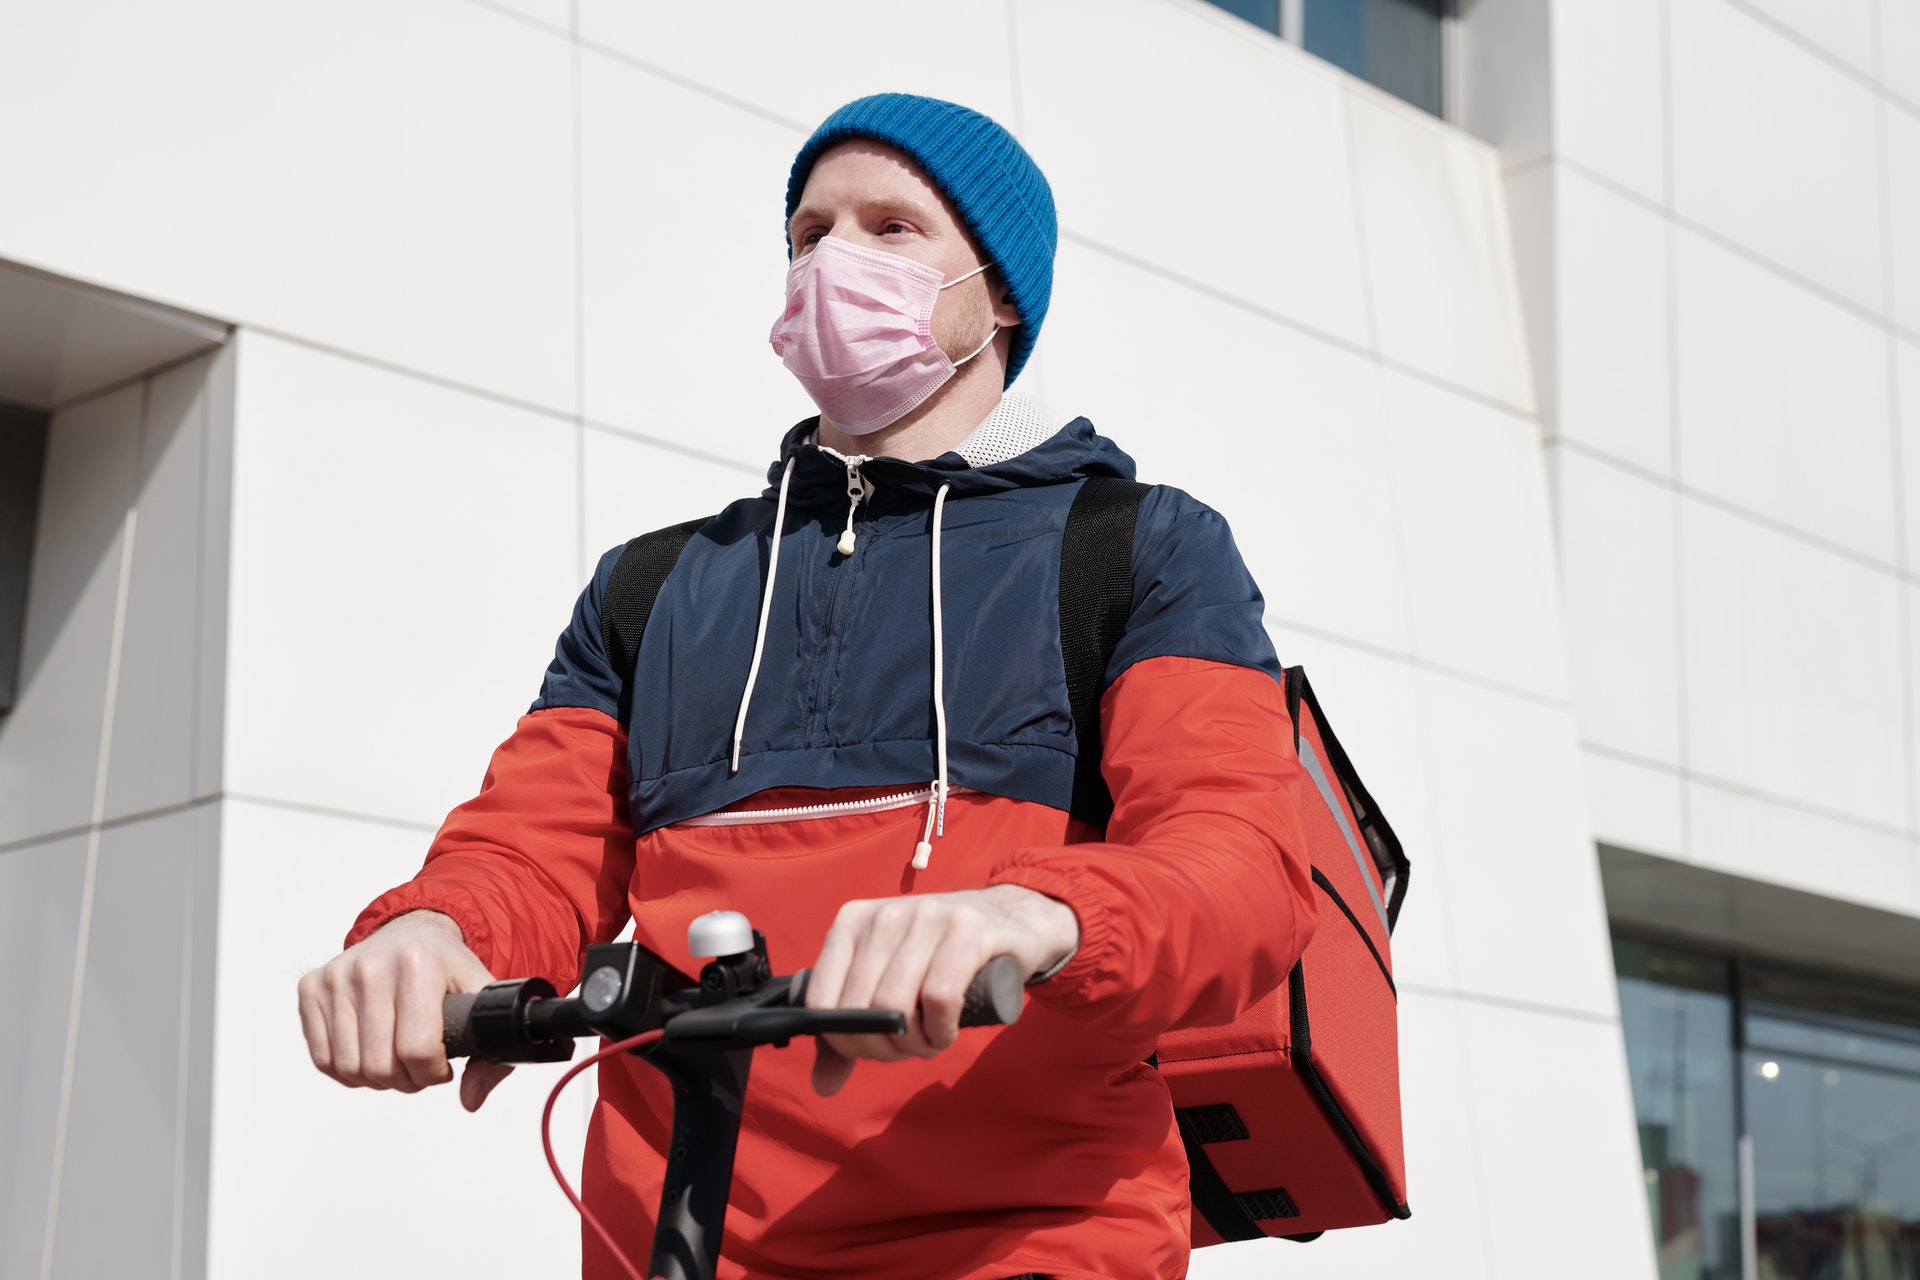 man on bicyle wearing a mask